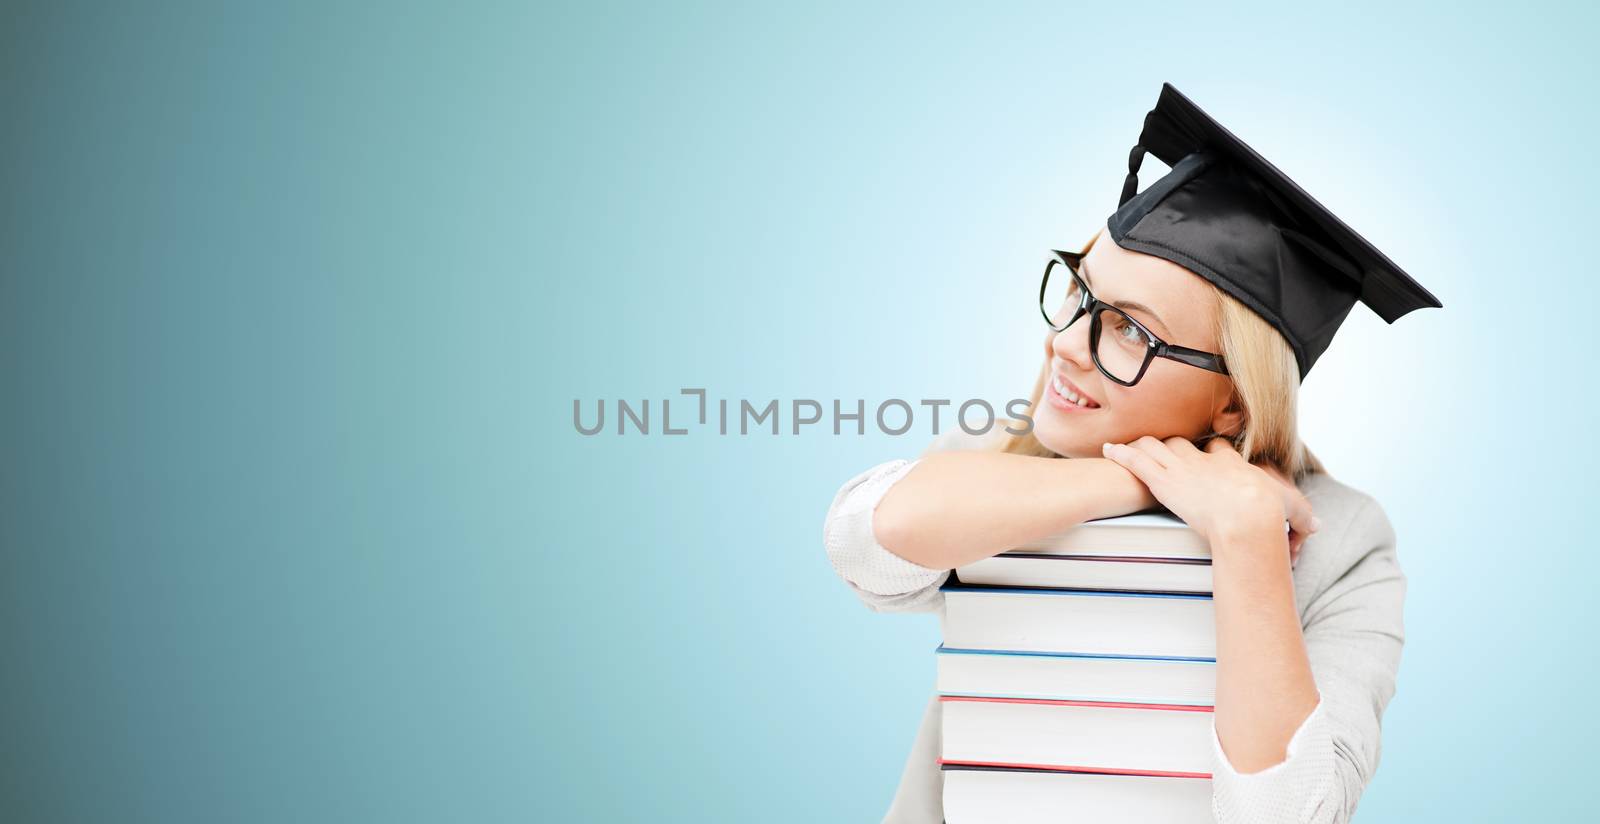 education, happiness, graduation and people concept - picture of happy student in mortar board cap with stack of books daydreaming over blue background